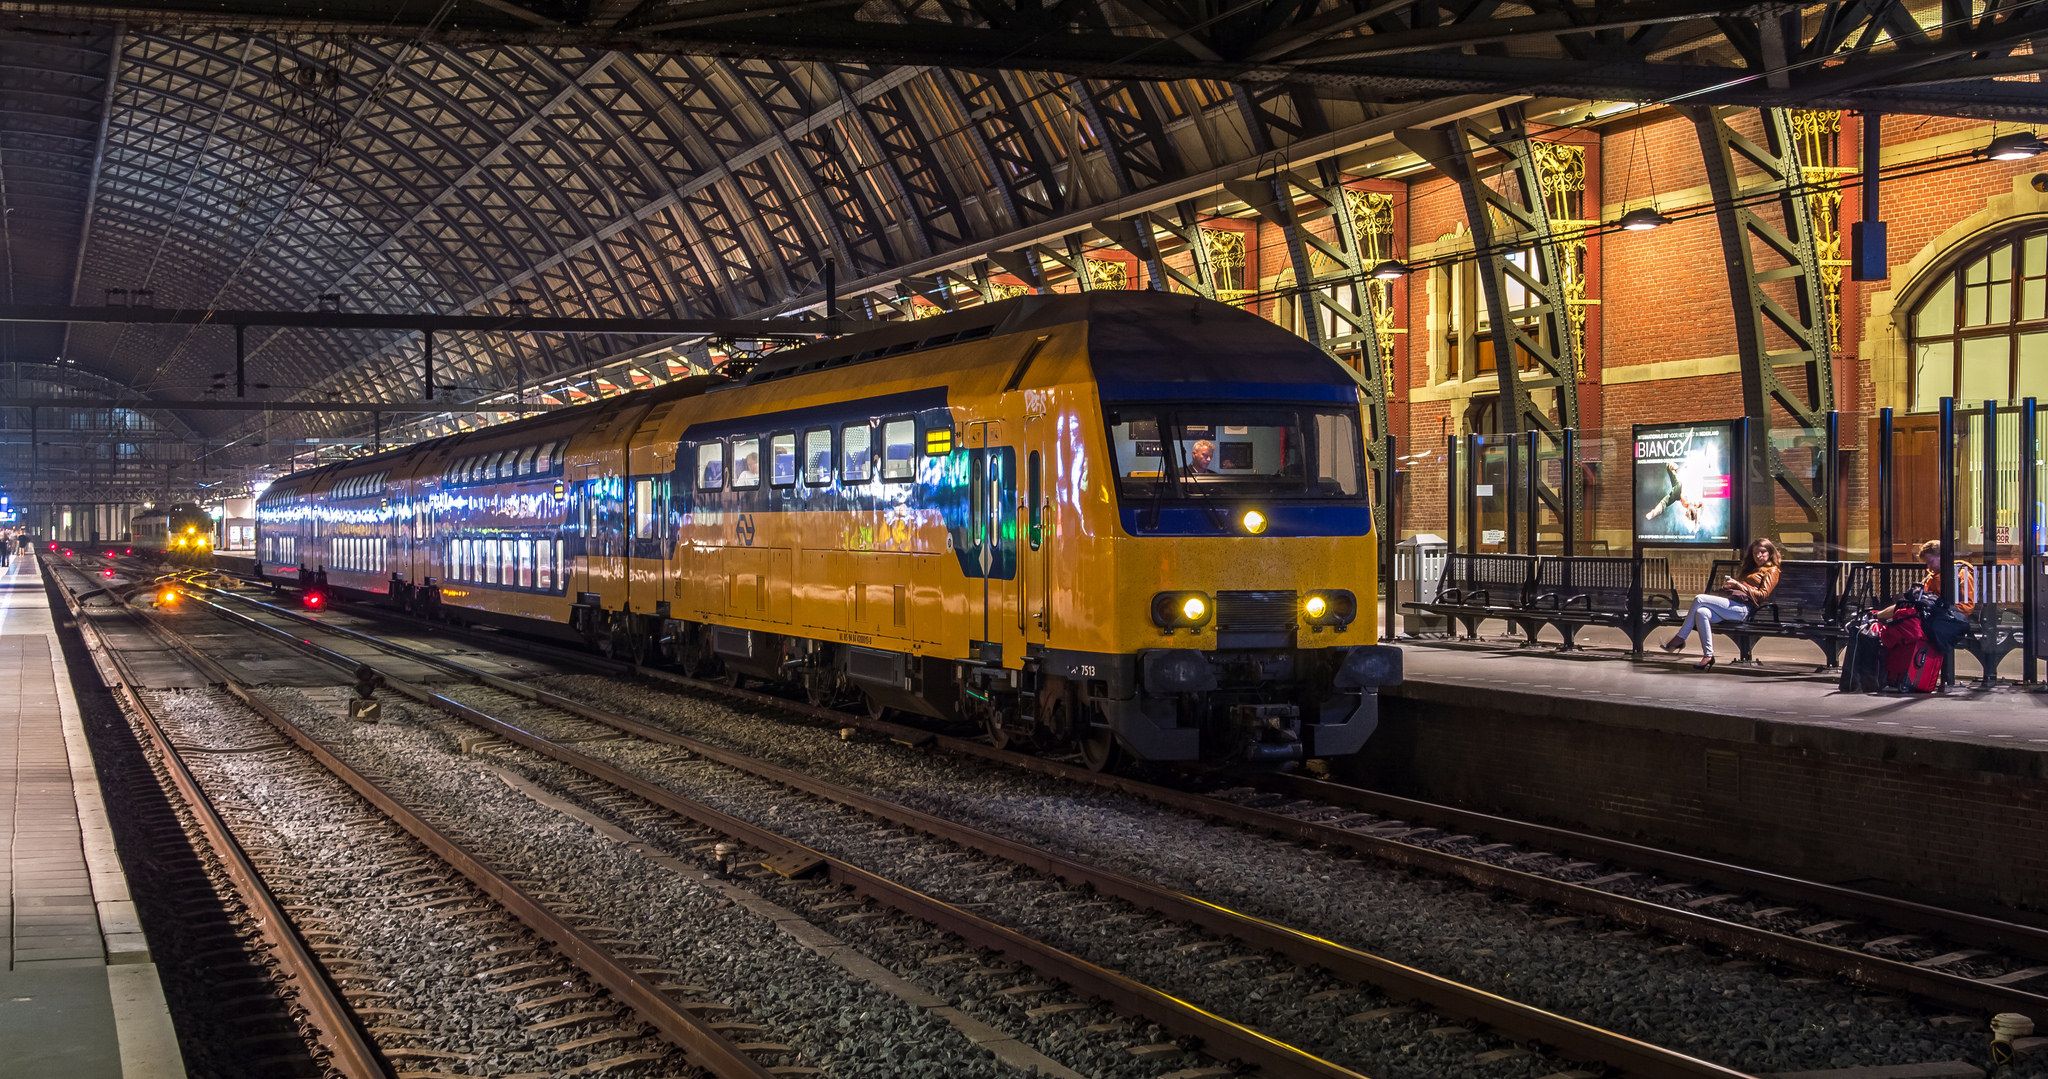 No trains between Haarlem and Leiden for 6 days from January 26